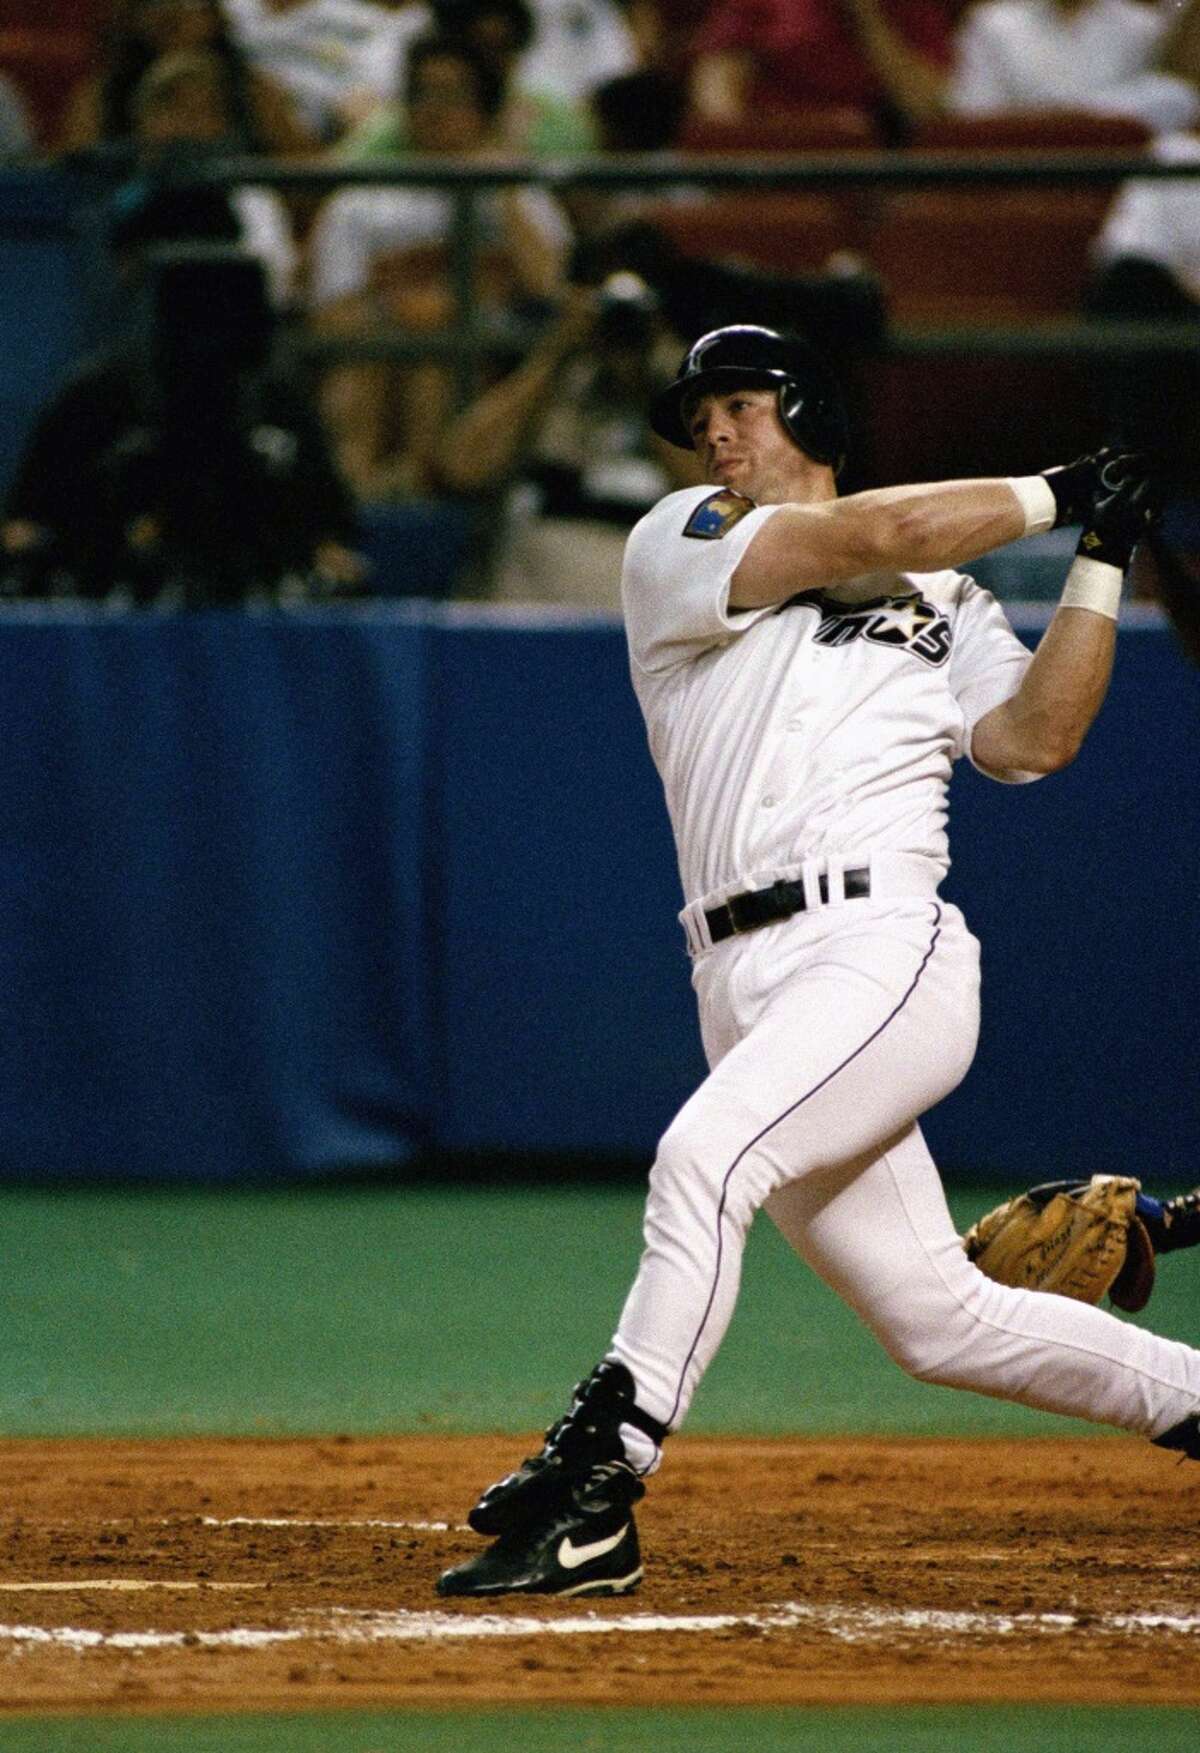 2016 Baseball Hall of Fame contenders Former Houston Astros star Jeff Bagwell gets another shot to be elected to the Baseball Hall of Fame on Wednesday. Browse through the photos for a look at the top contenders for the Hall of Fame and measure their odds of getting in this year.